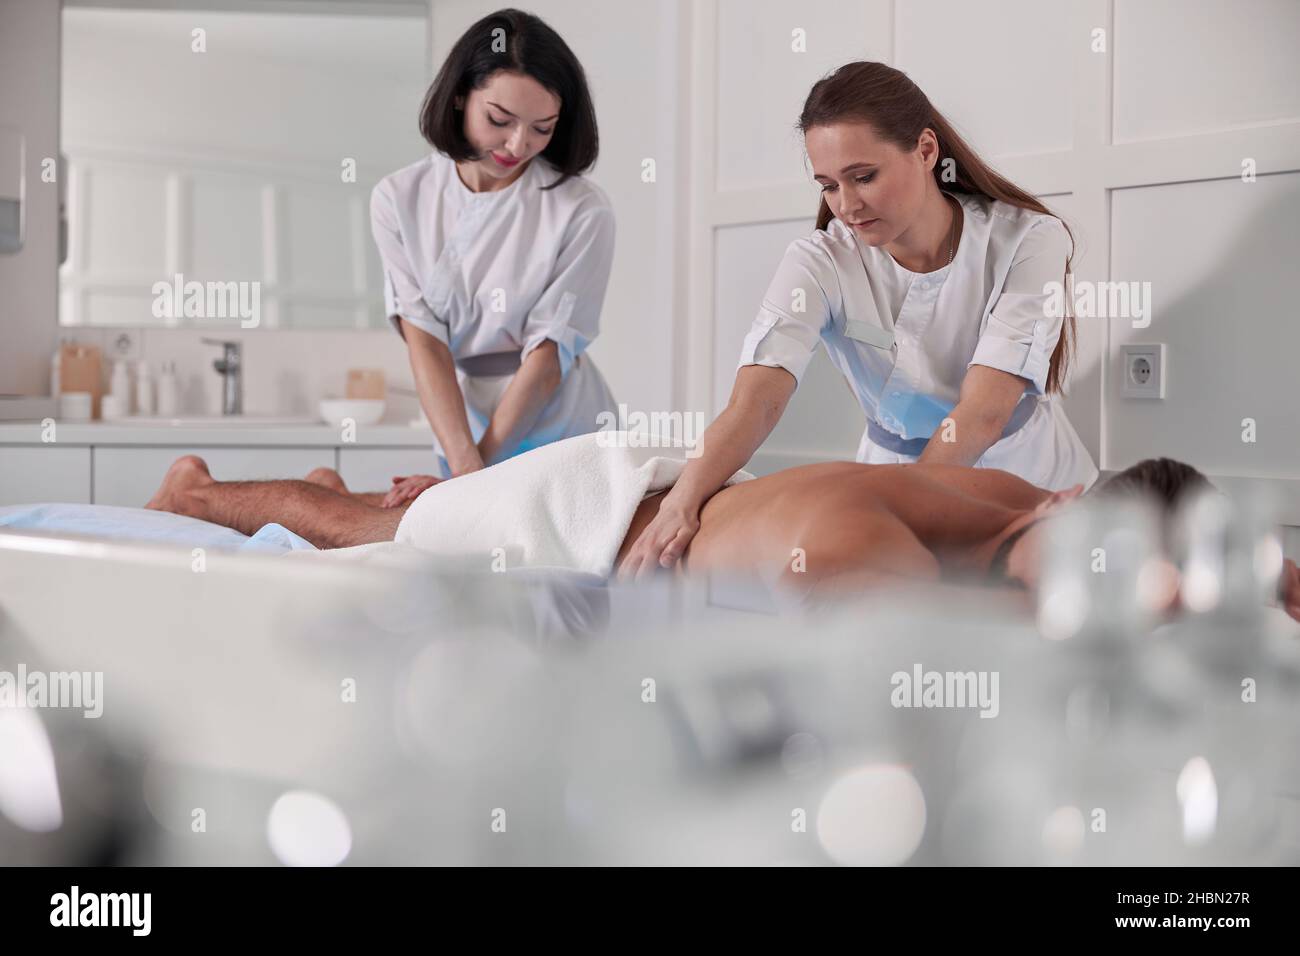 Therapists do massage of back and legs to male client in contemporary hospital office Stock Photo